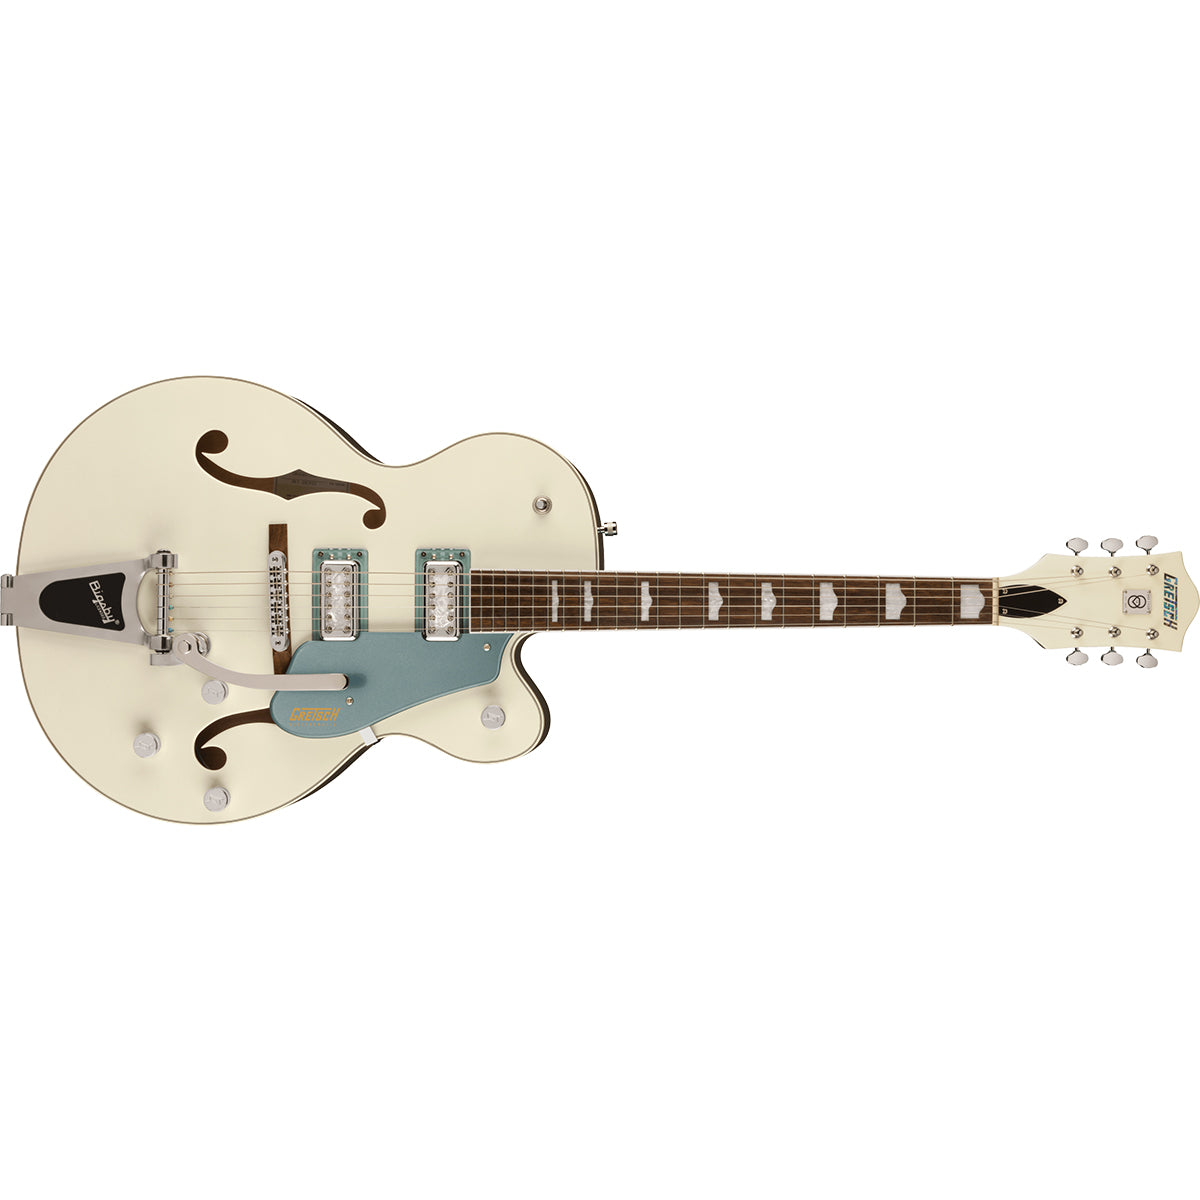 Gretsch G5420T-140 Electromatic 140th Double Platinum Anniversary Hollow Body Electric Guitar Two-Tone Pearl/Stone Platinum w/ Bigsby - 2506170574